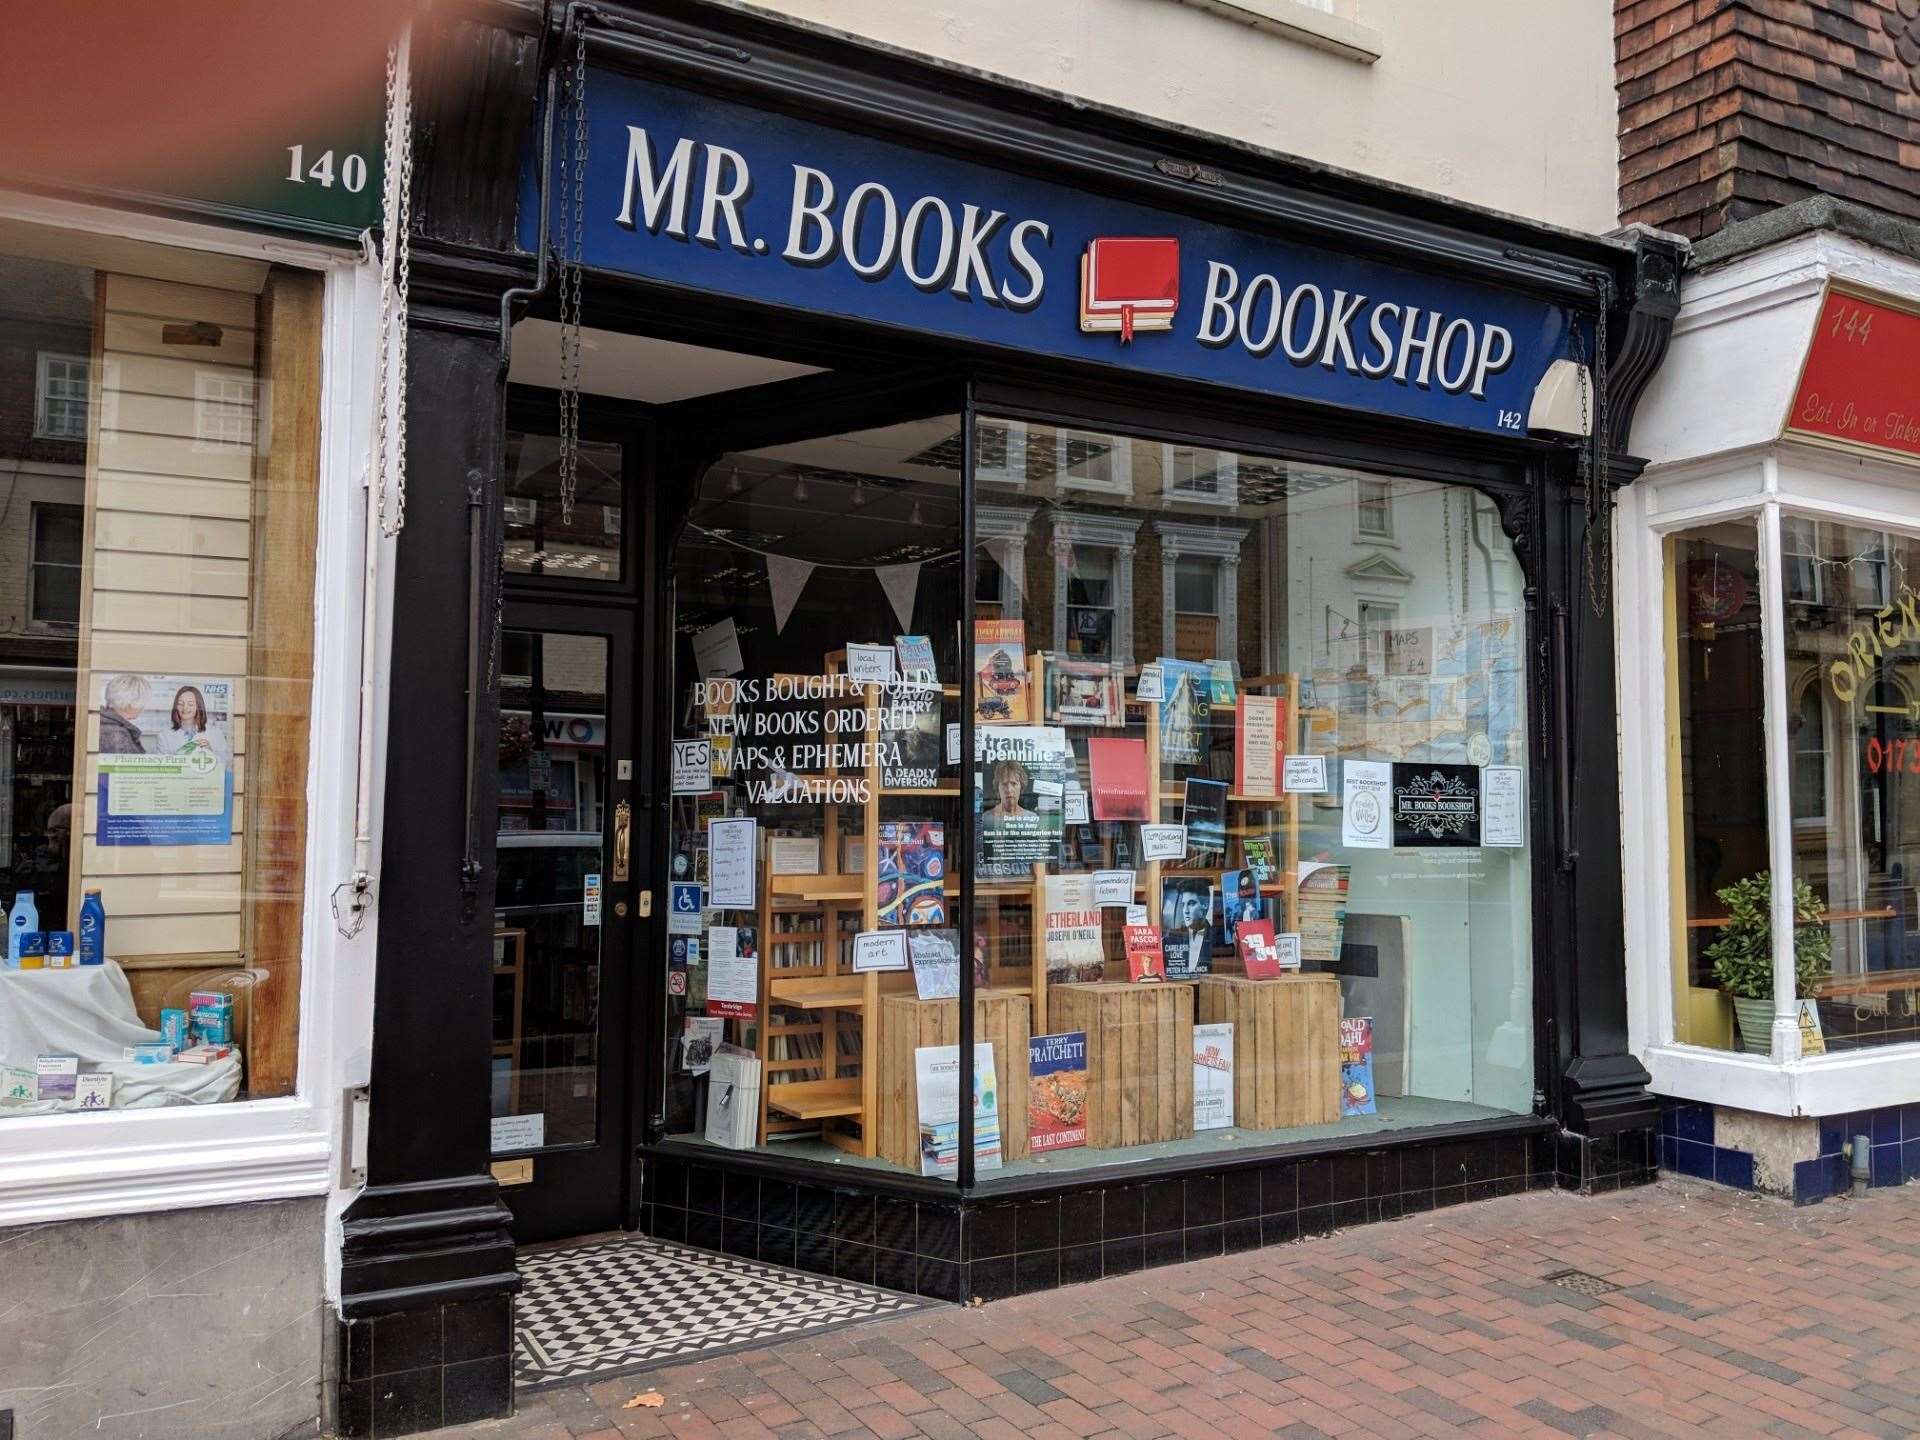 The bookshop will continue to offer online deliveries